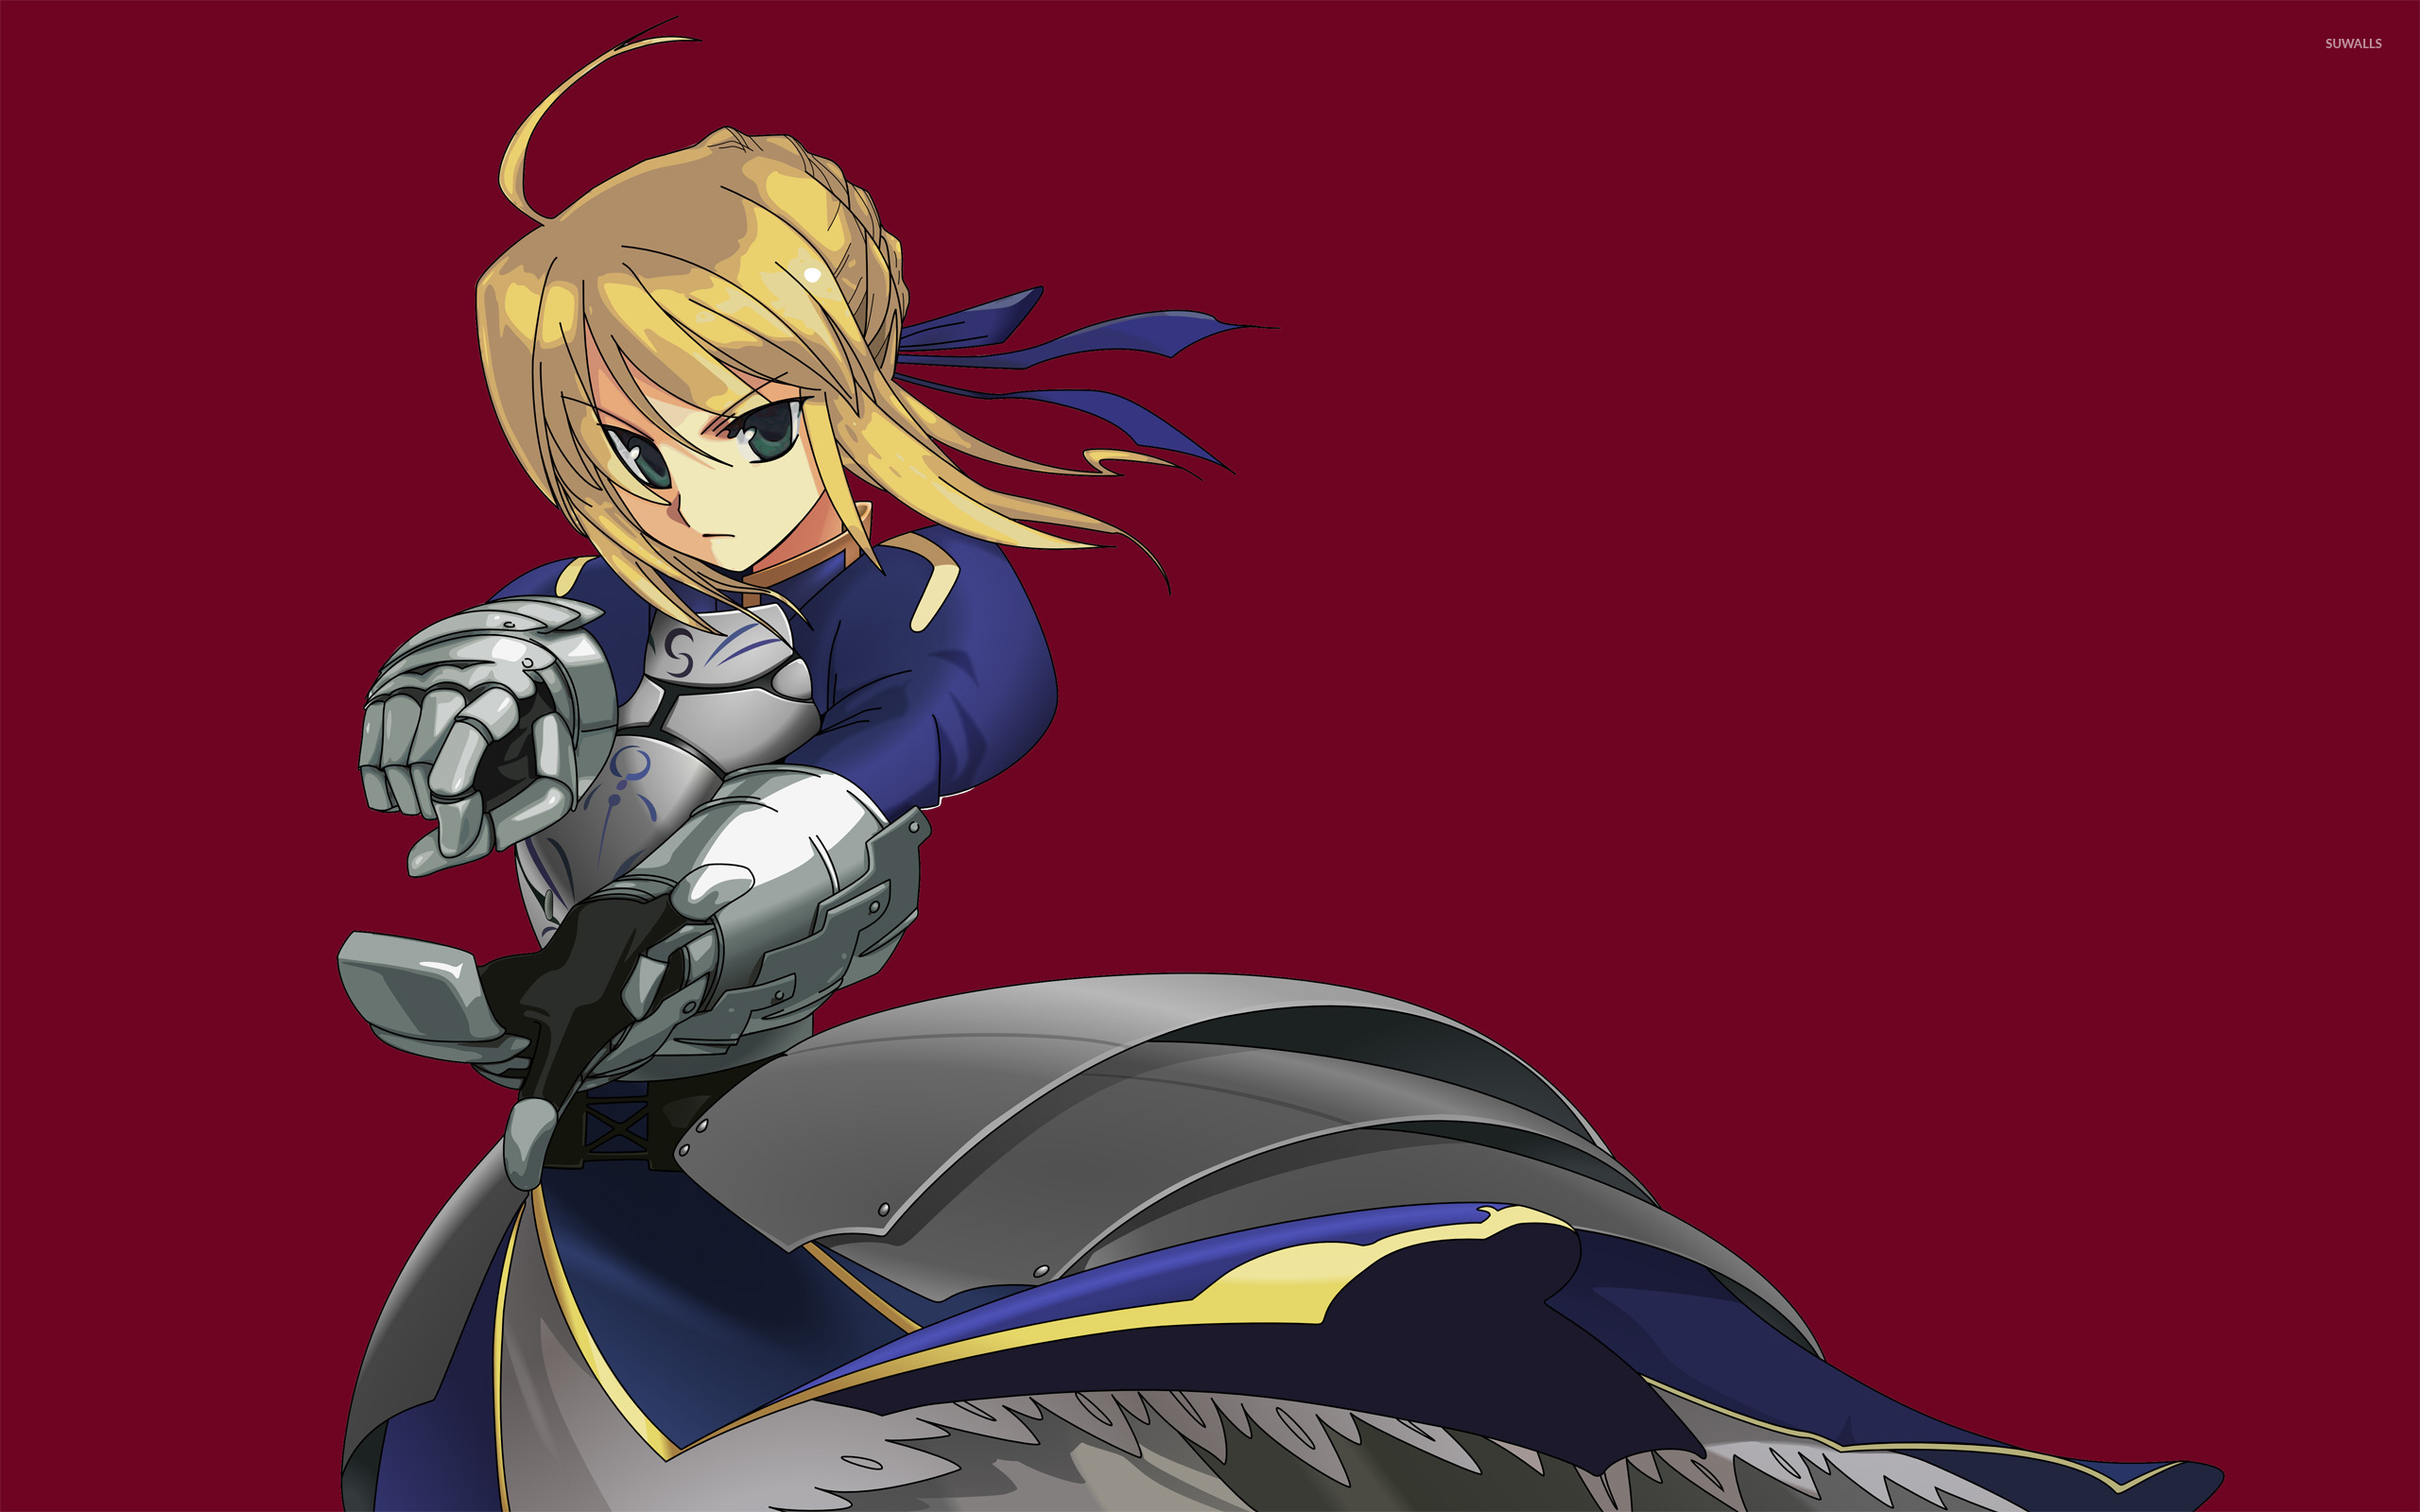 Saber - Fate/stay night [10] wallpaper - Anime wallpapers - #7499